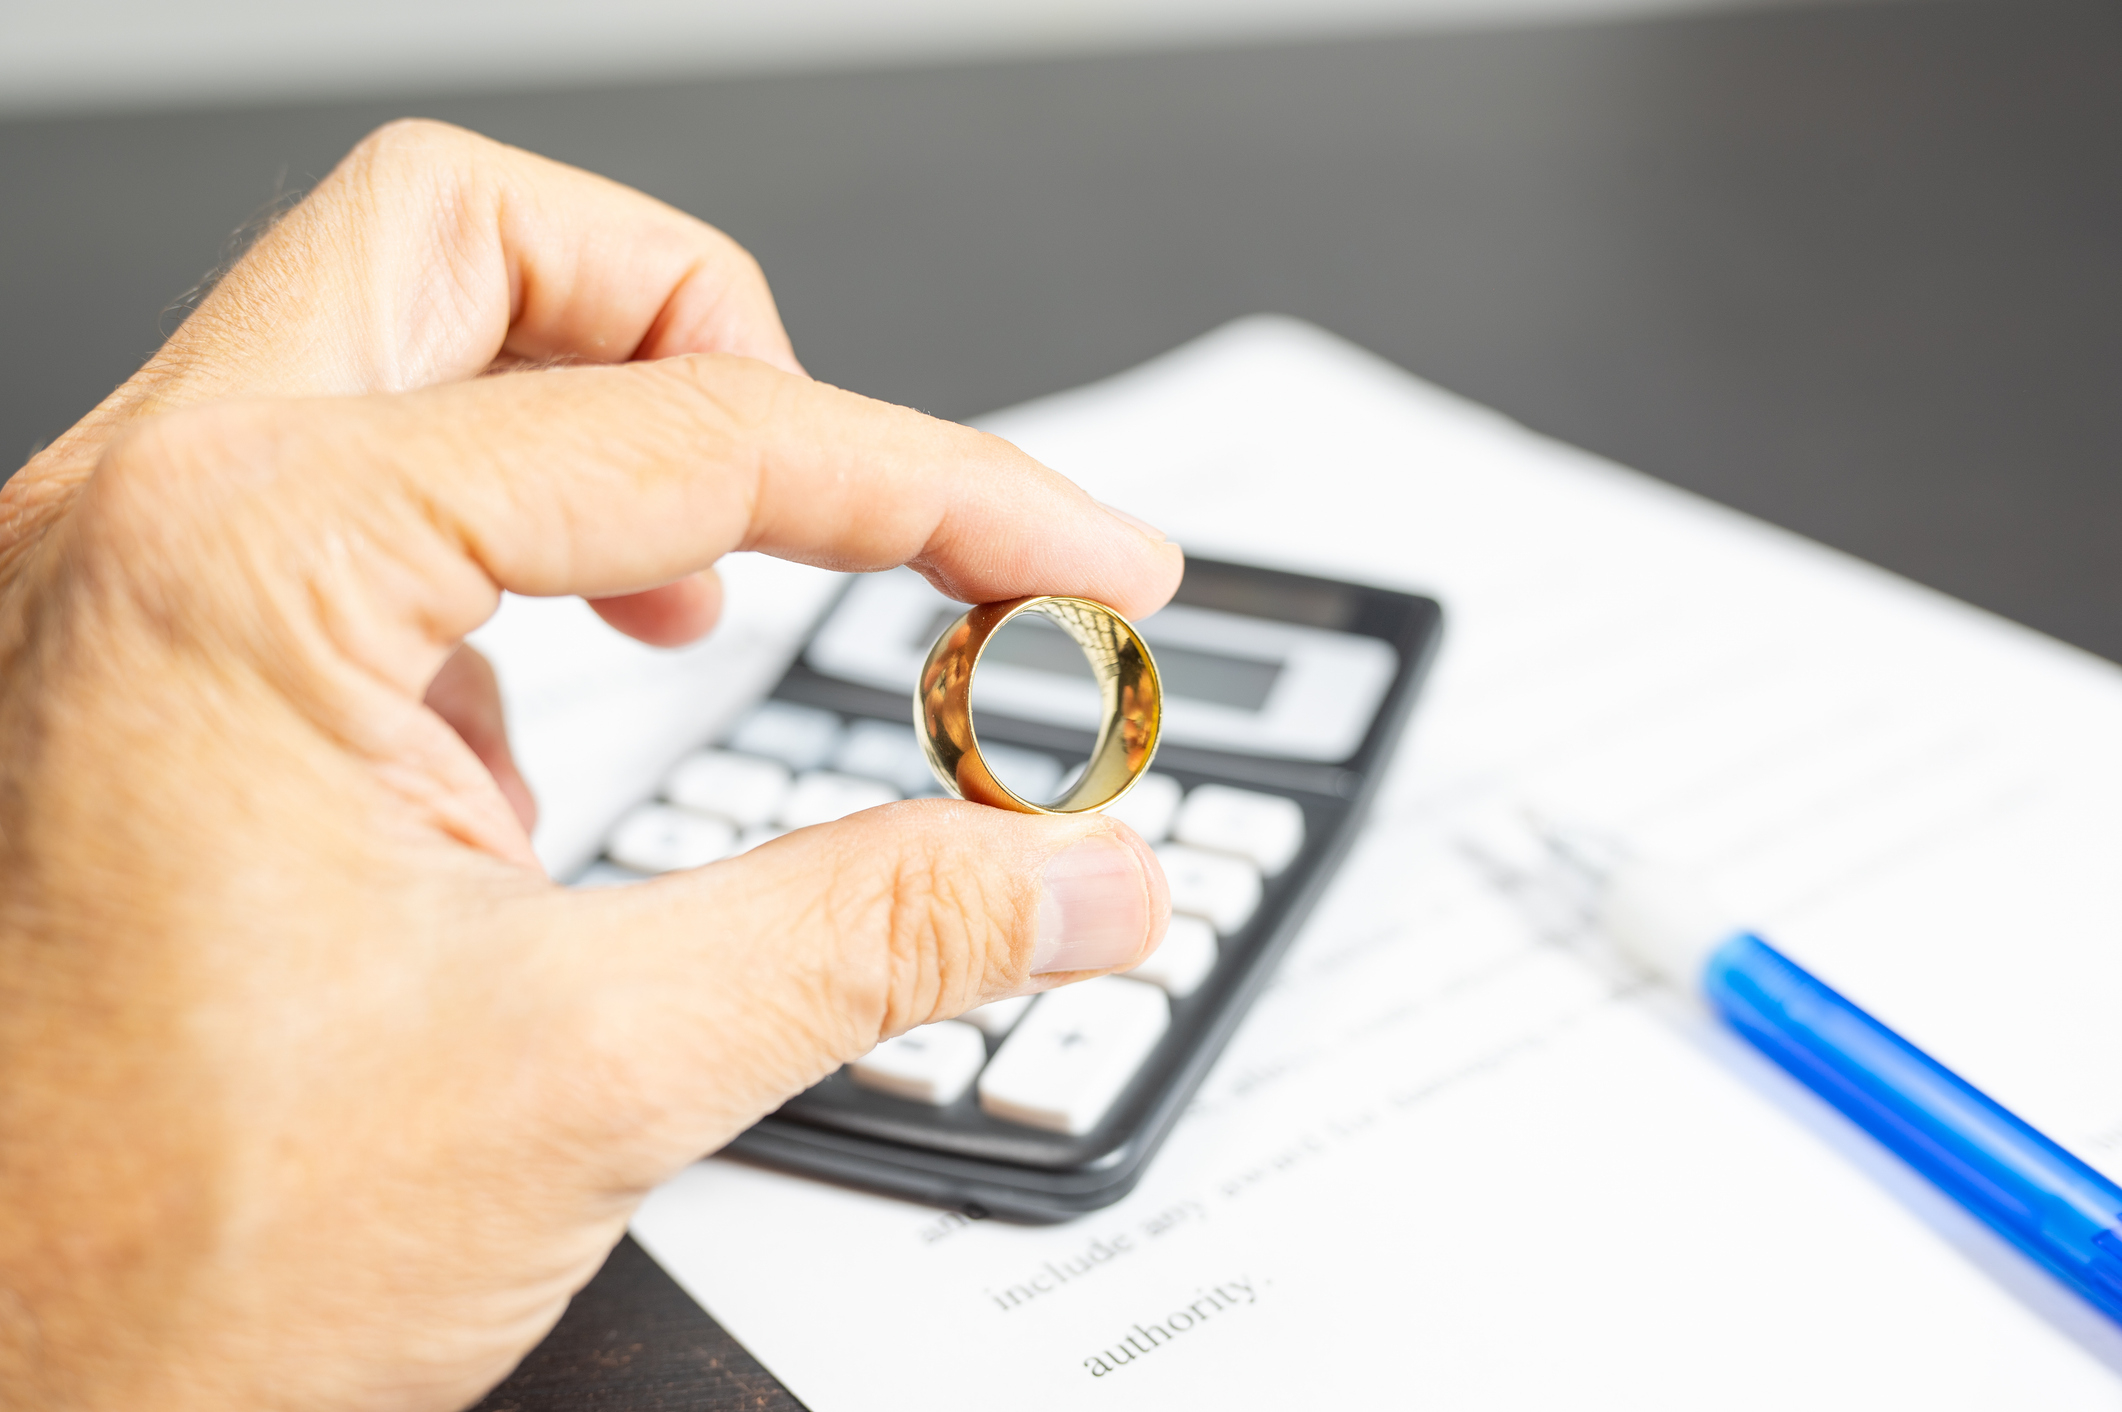 Hand holding a wedding ring above a calculator on a document, symbolizing financial considerations in marriage